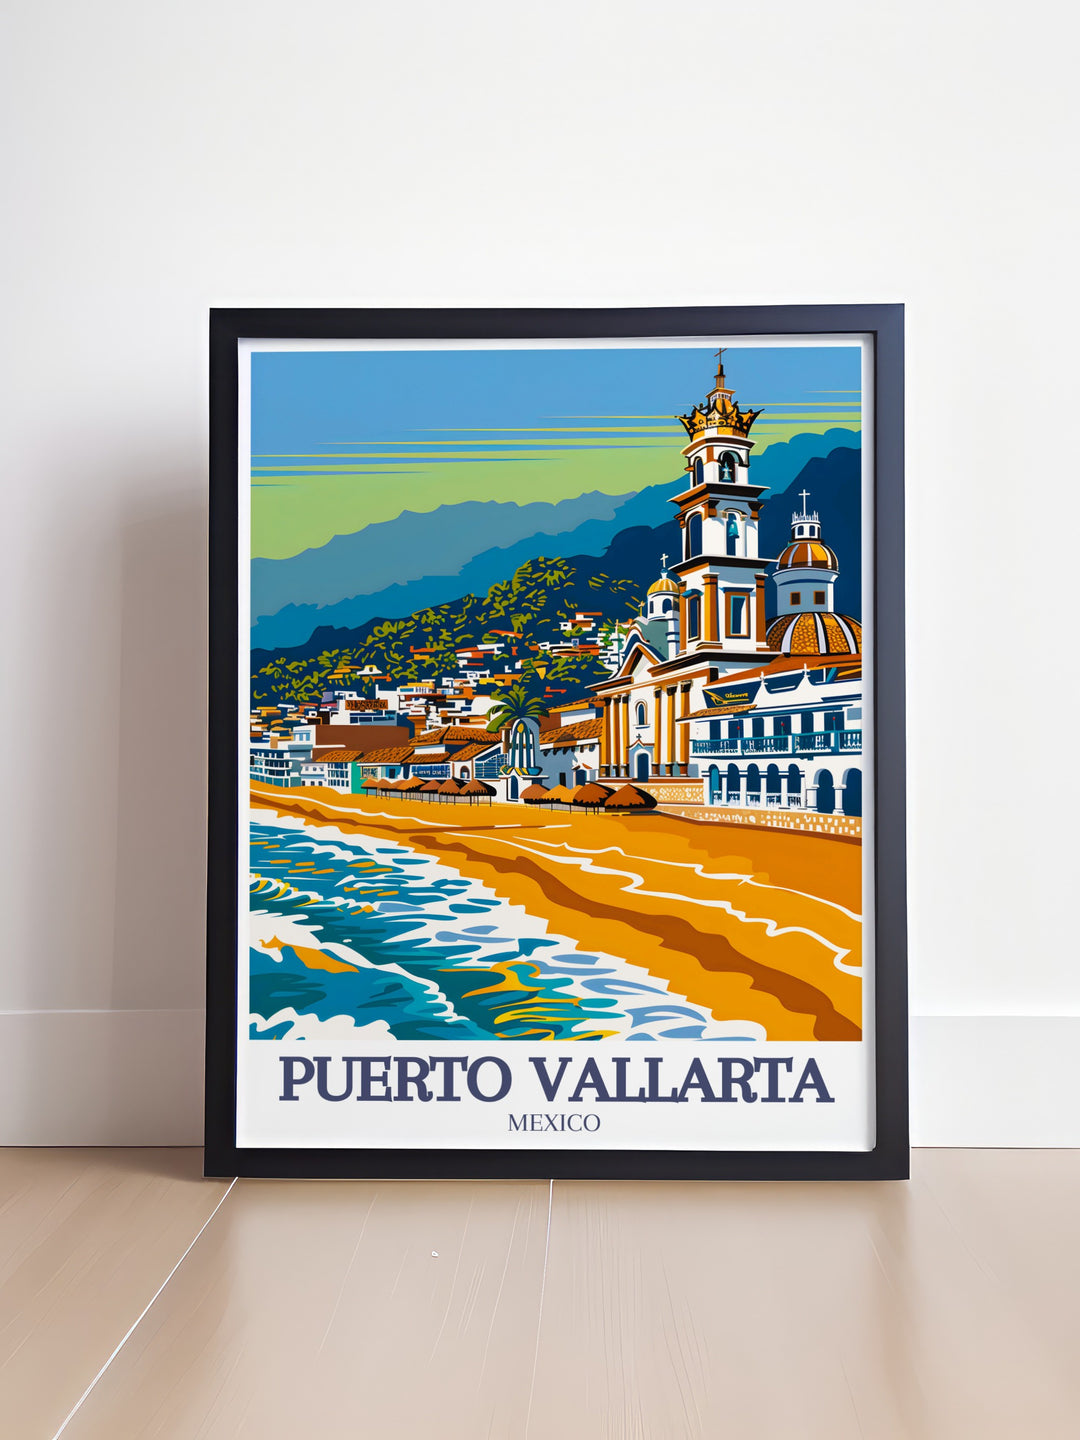 Travel Poster Print of Puebla offering a vivid depiction of bustling streets and iconic landmarks complemented by Puerto Vallarta beach Our Lady of Guadalupe Church perfect wall decor for any setting